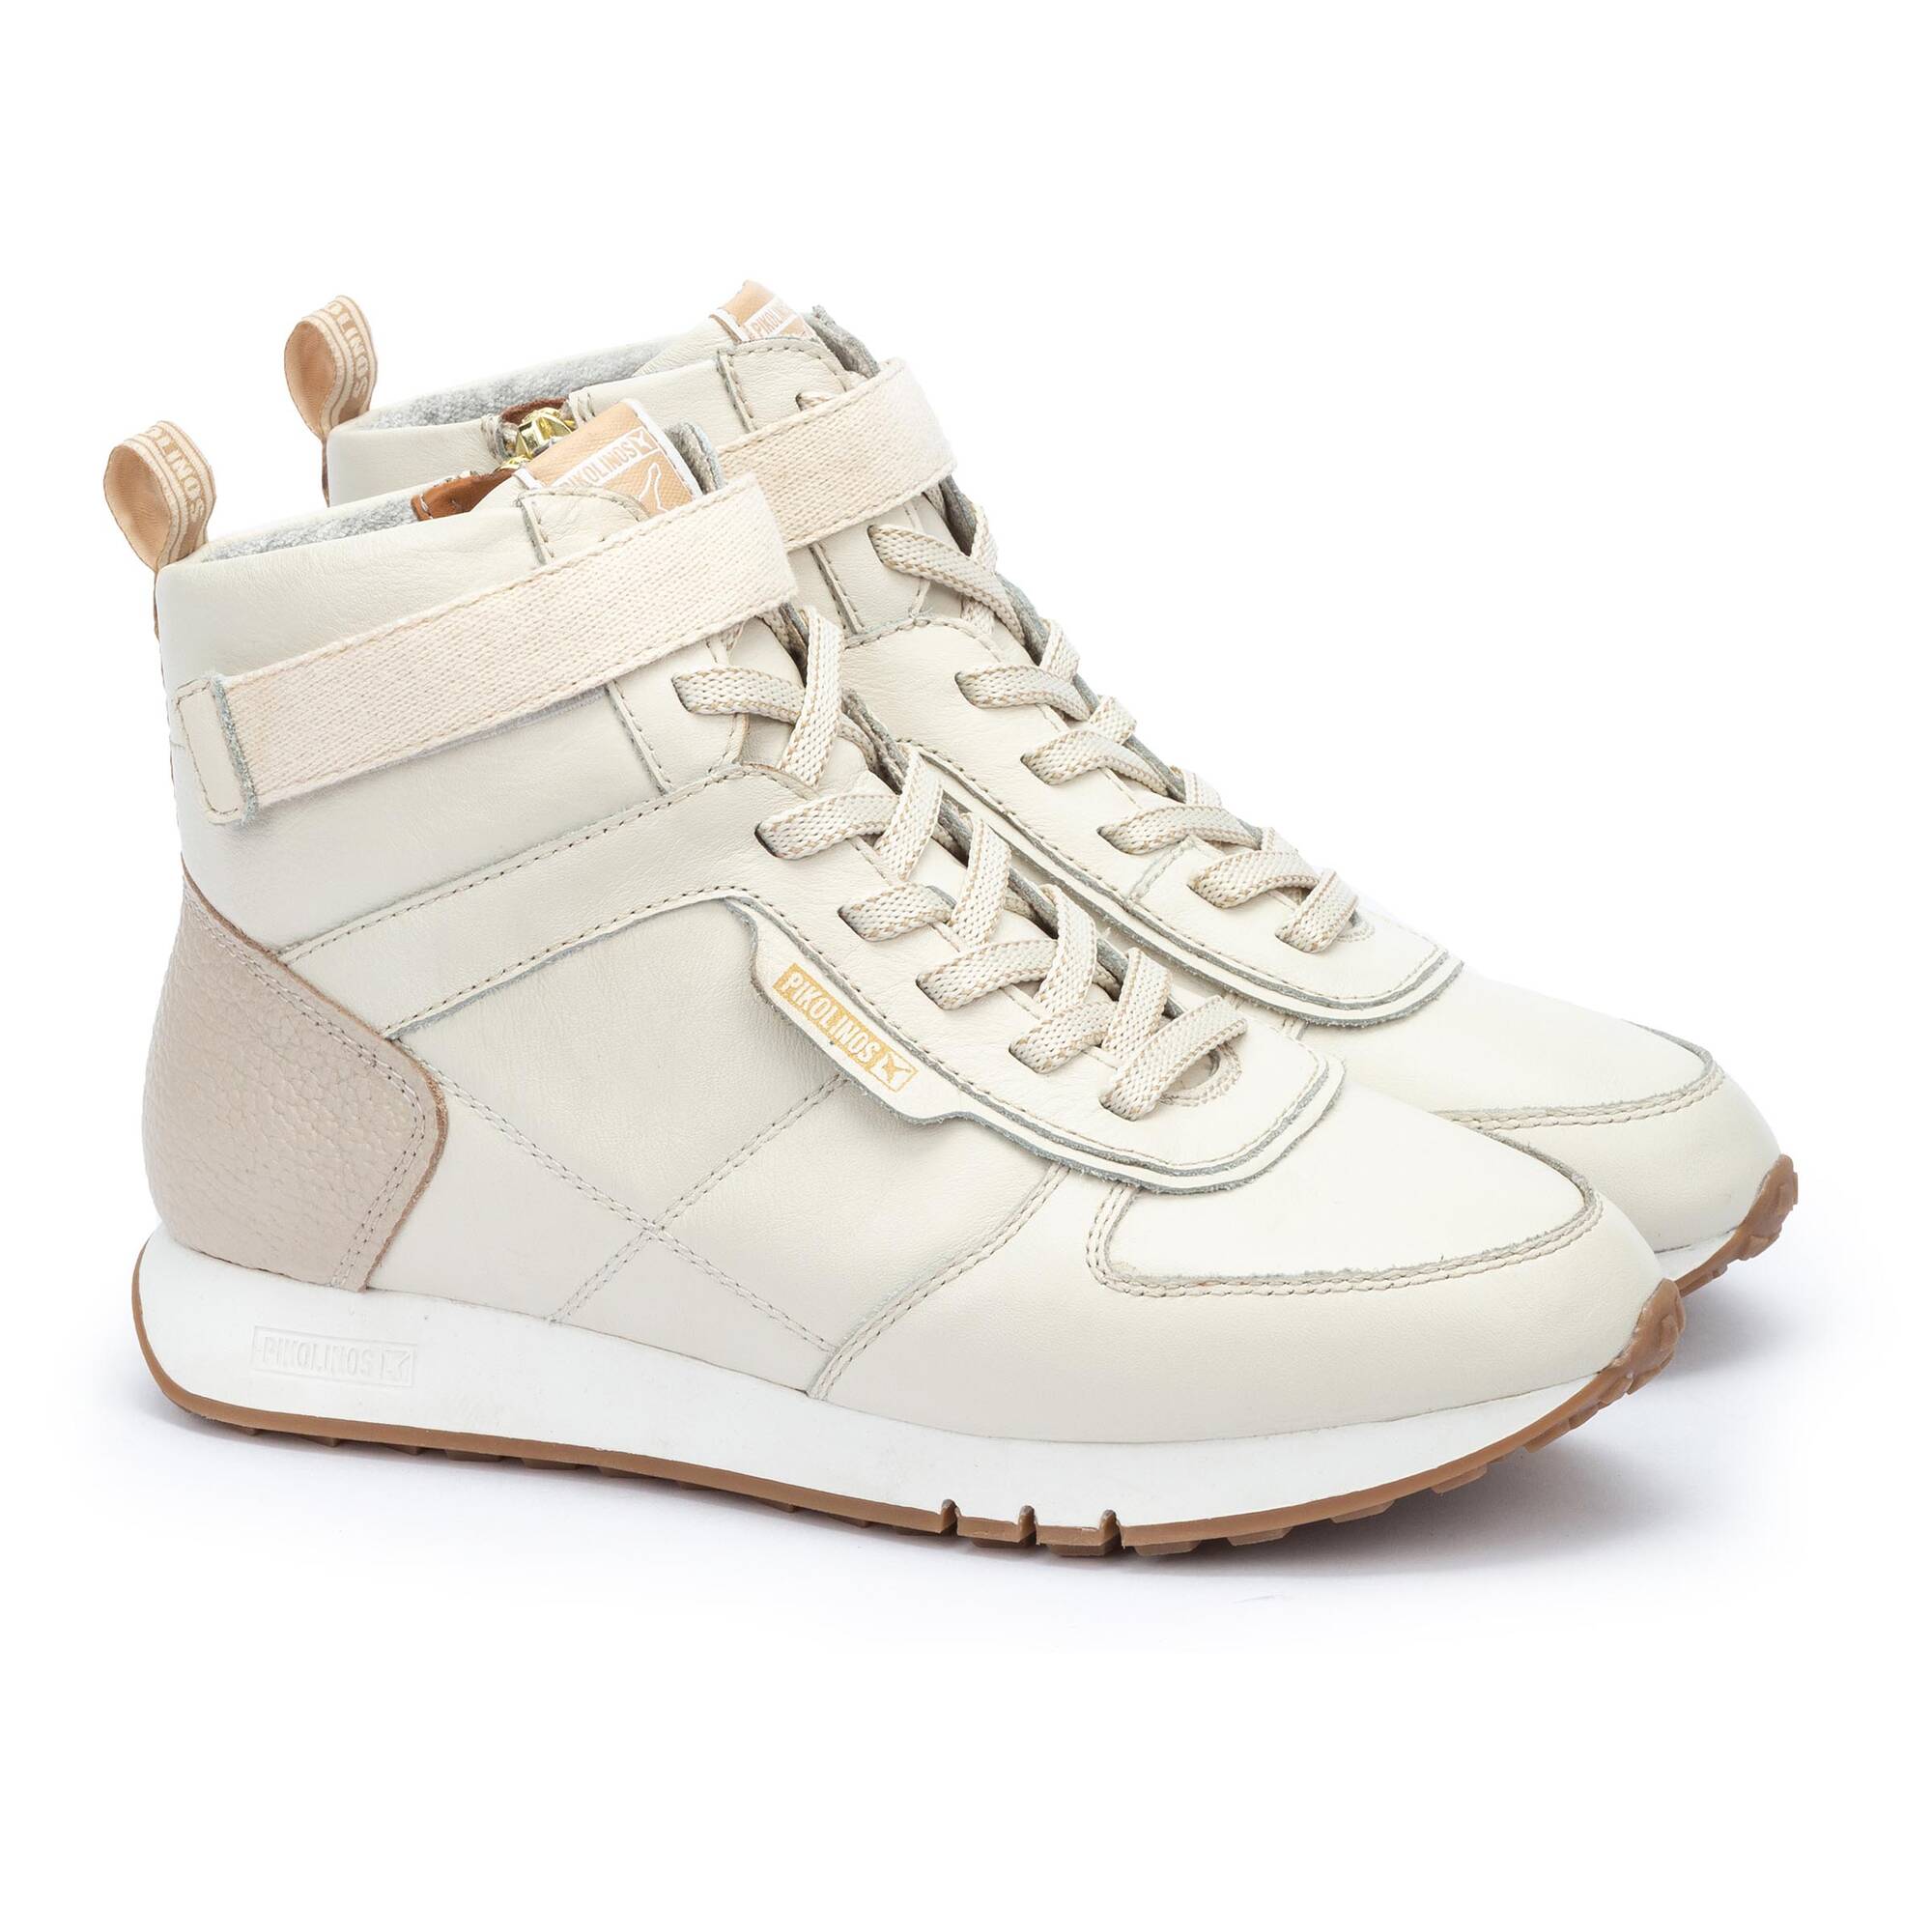 Toro miel Obsesión Women`s Leather Shoes BARCELONA W4P-8855C1 |OUTLET Pikolinos